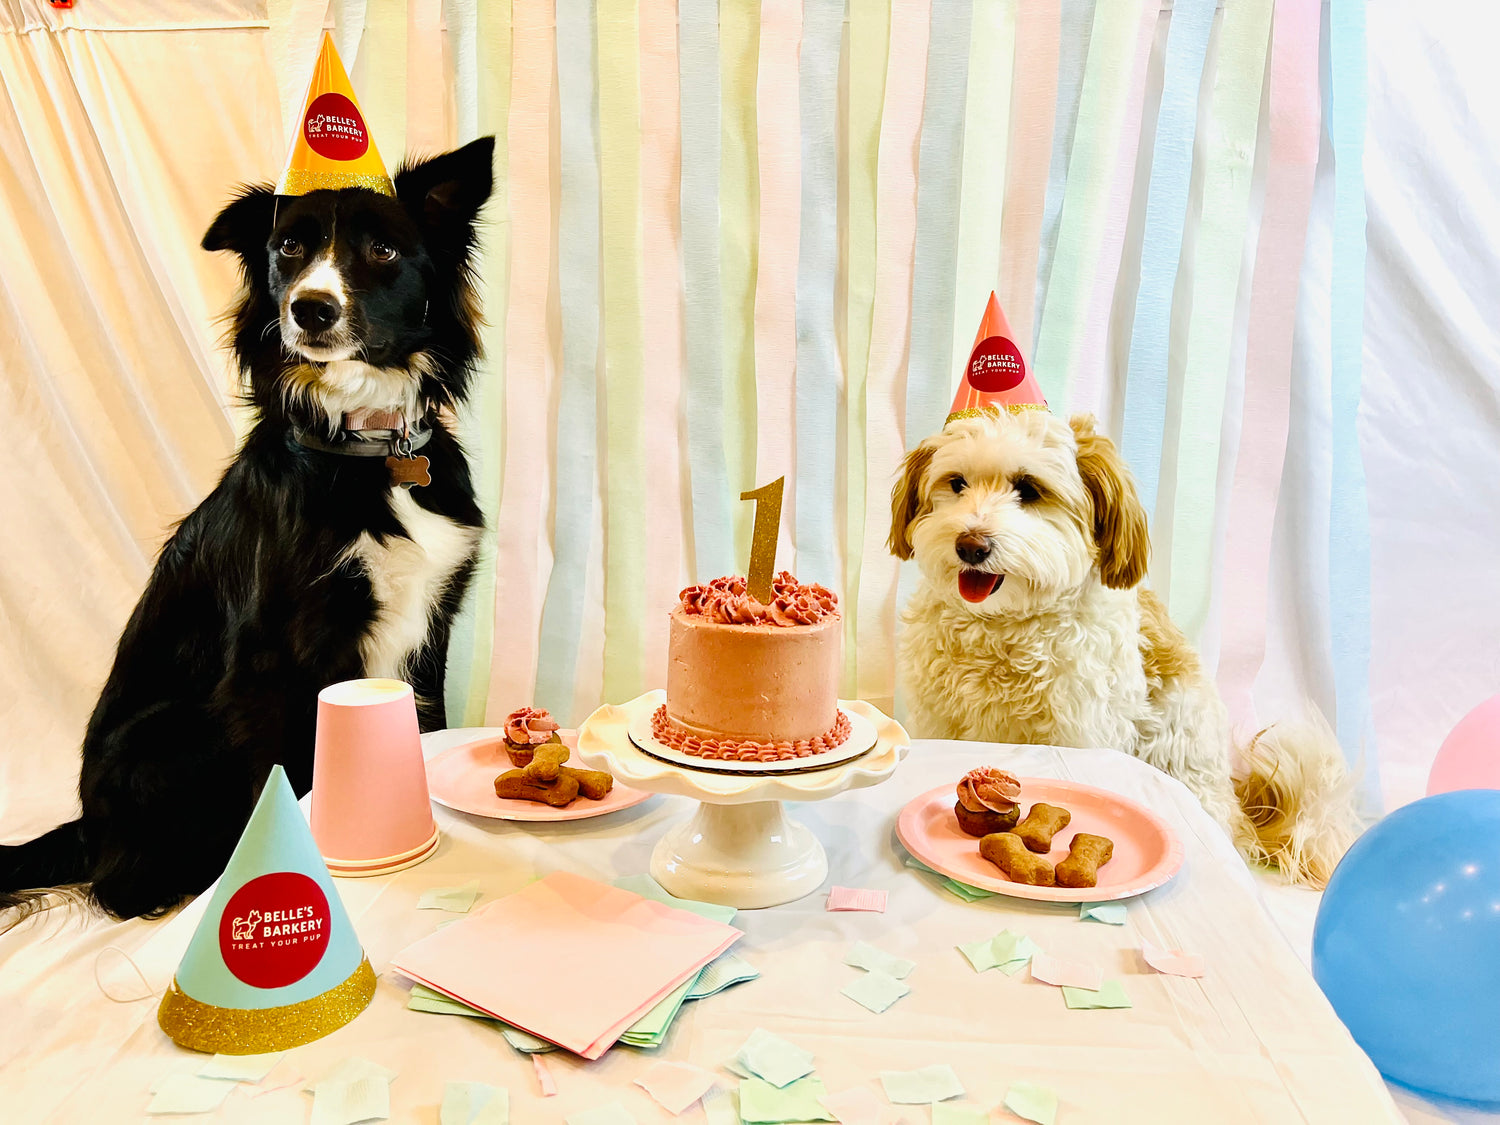 Two dogs celebrating a birthday party. Custom dog cake with number one gold glitter topper is in front of the dogs.